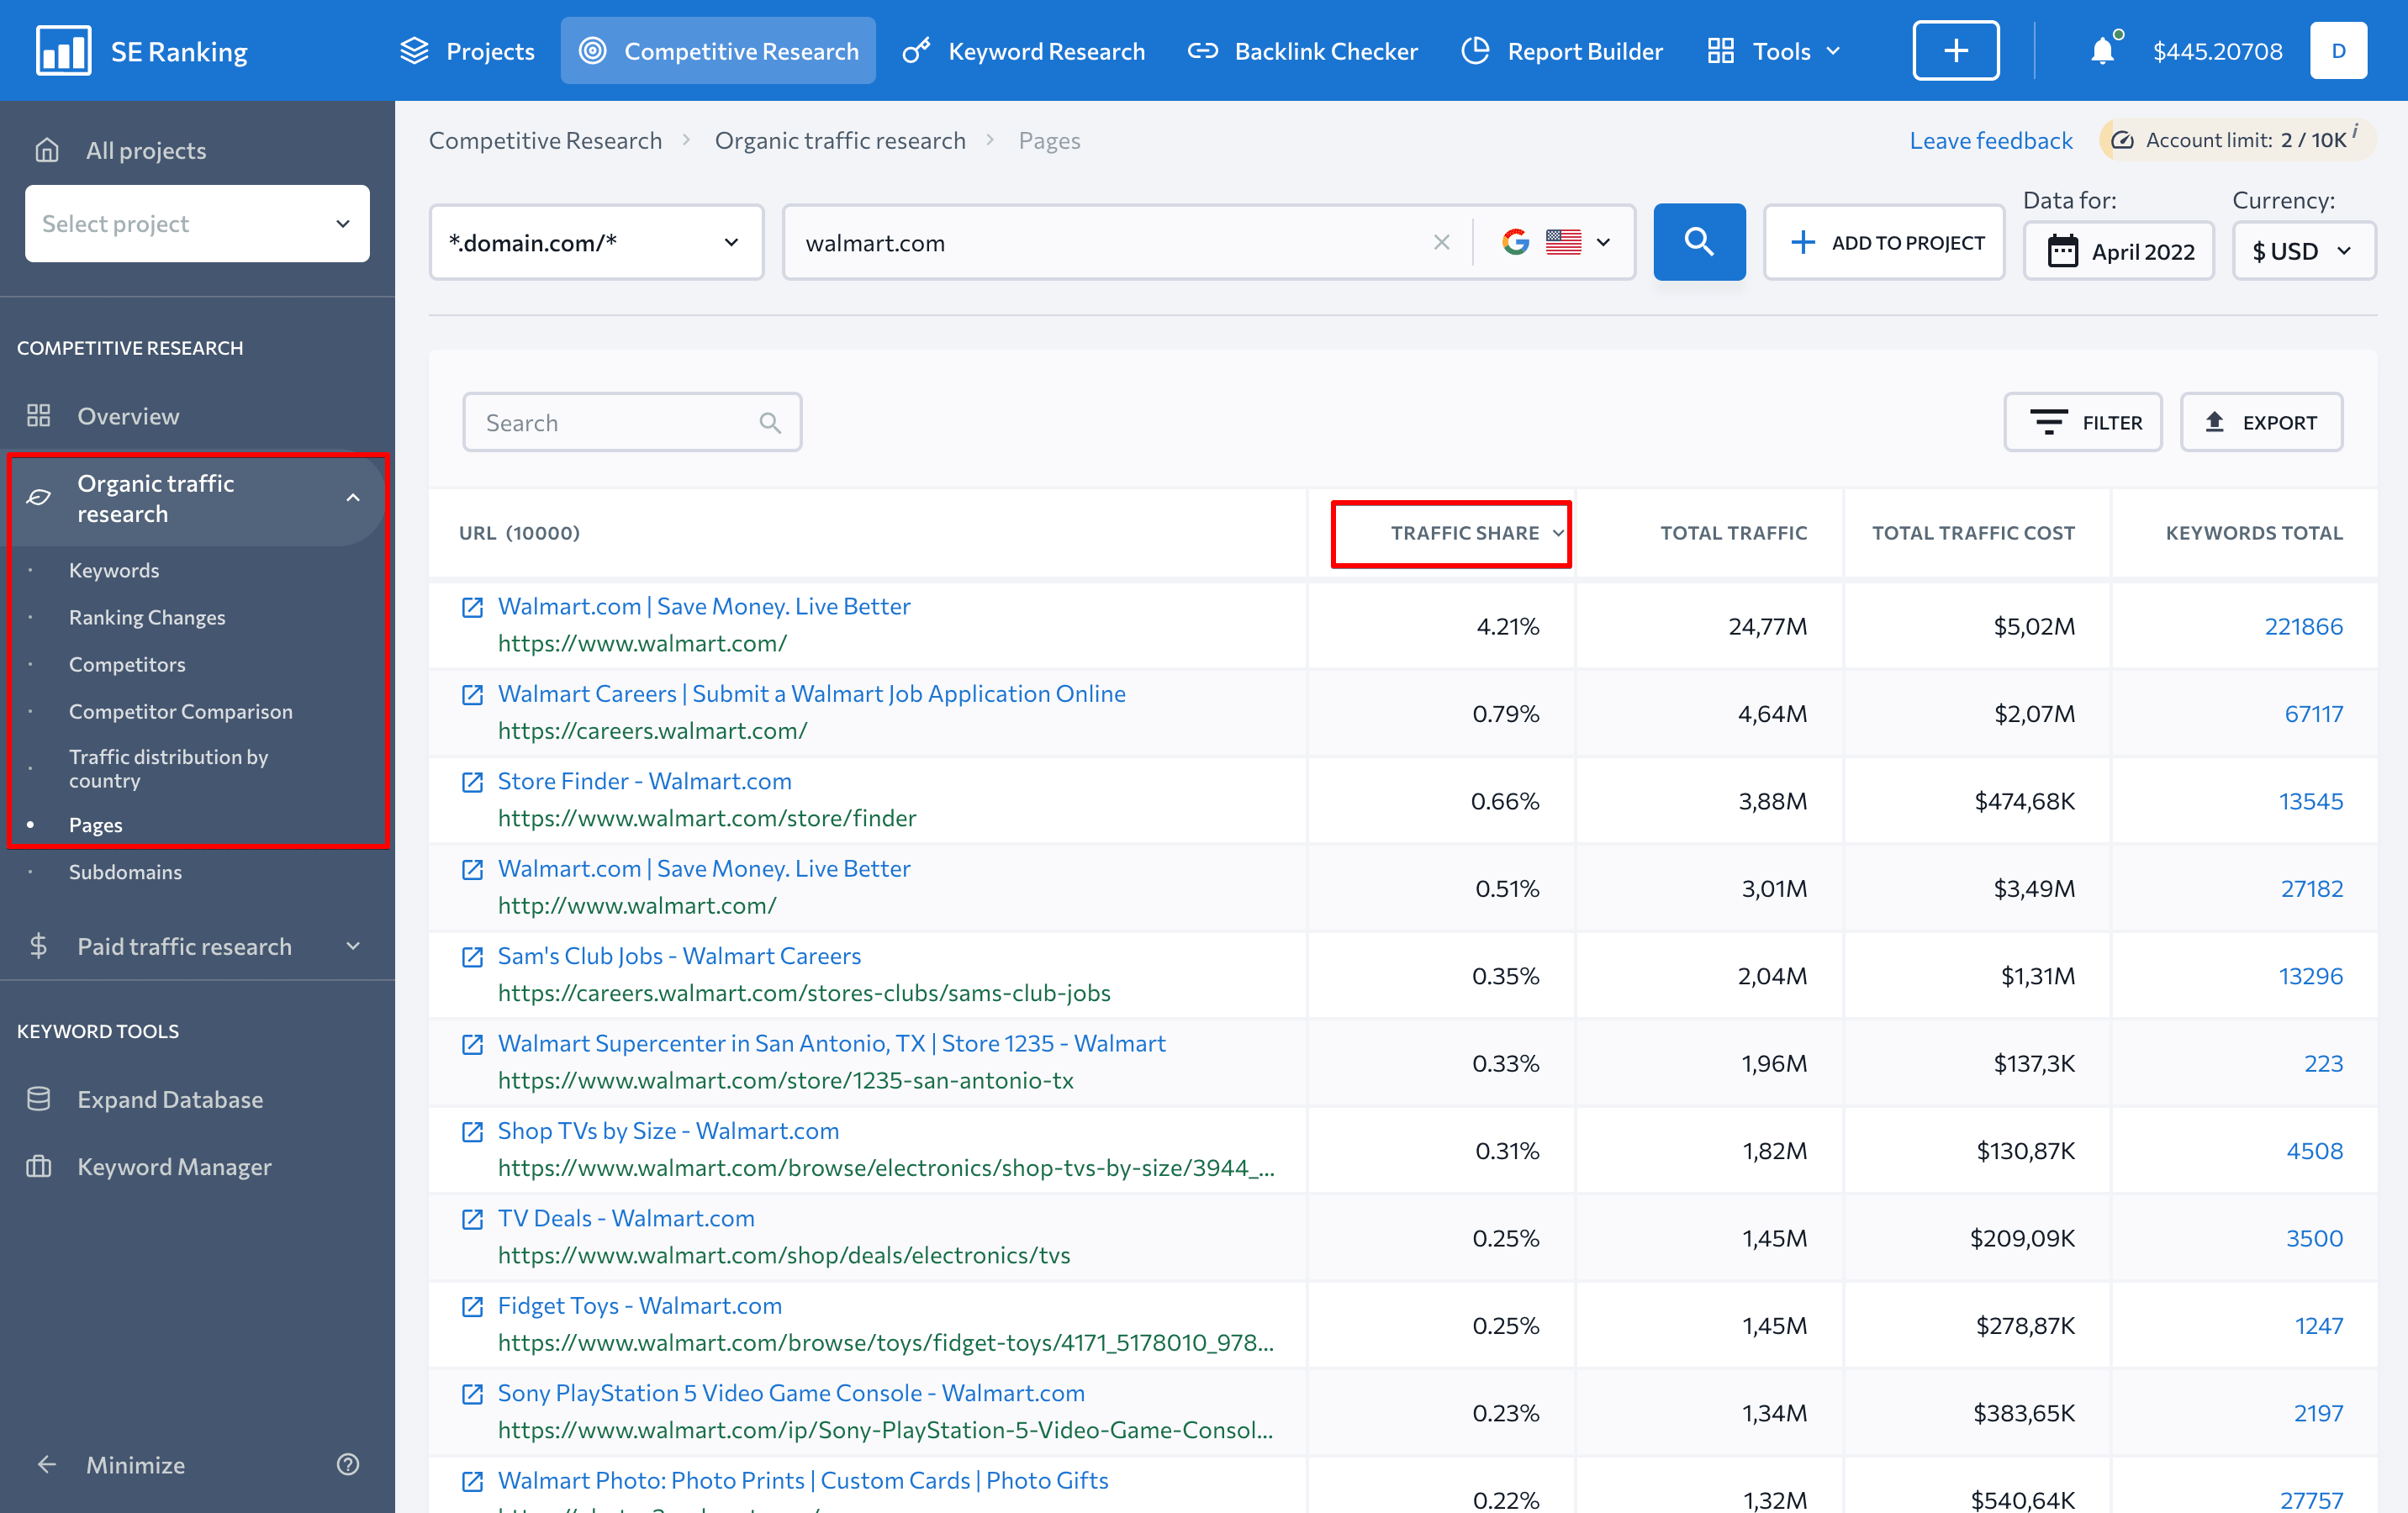 Analyzing top performing pages based on traffic share